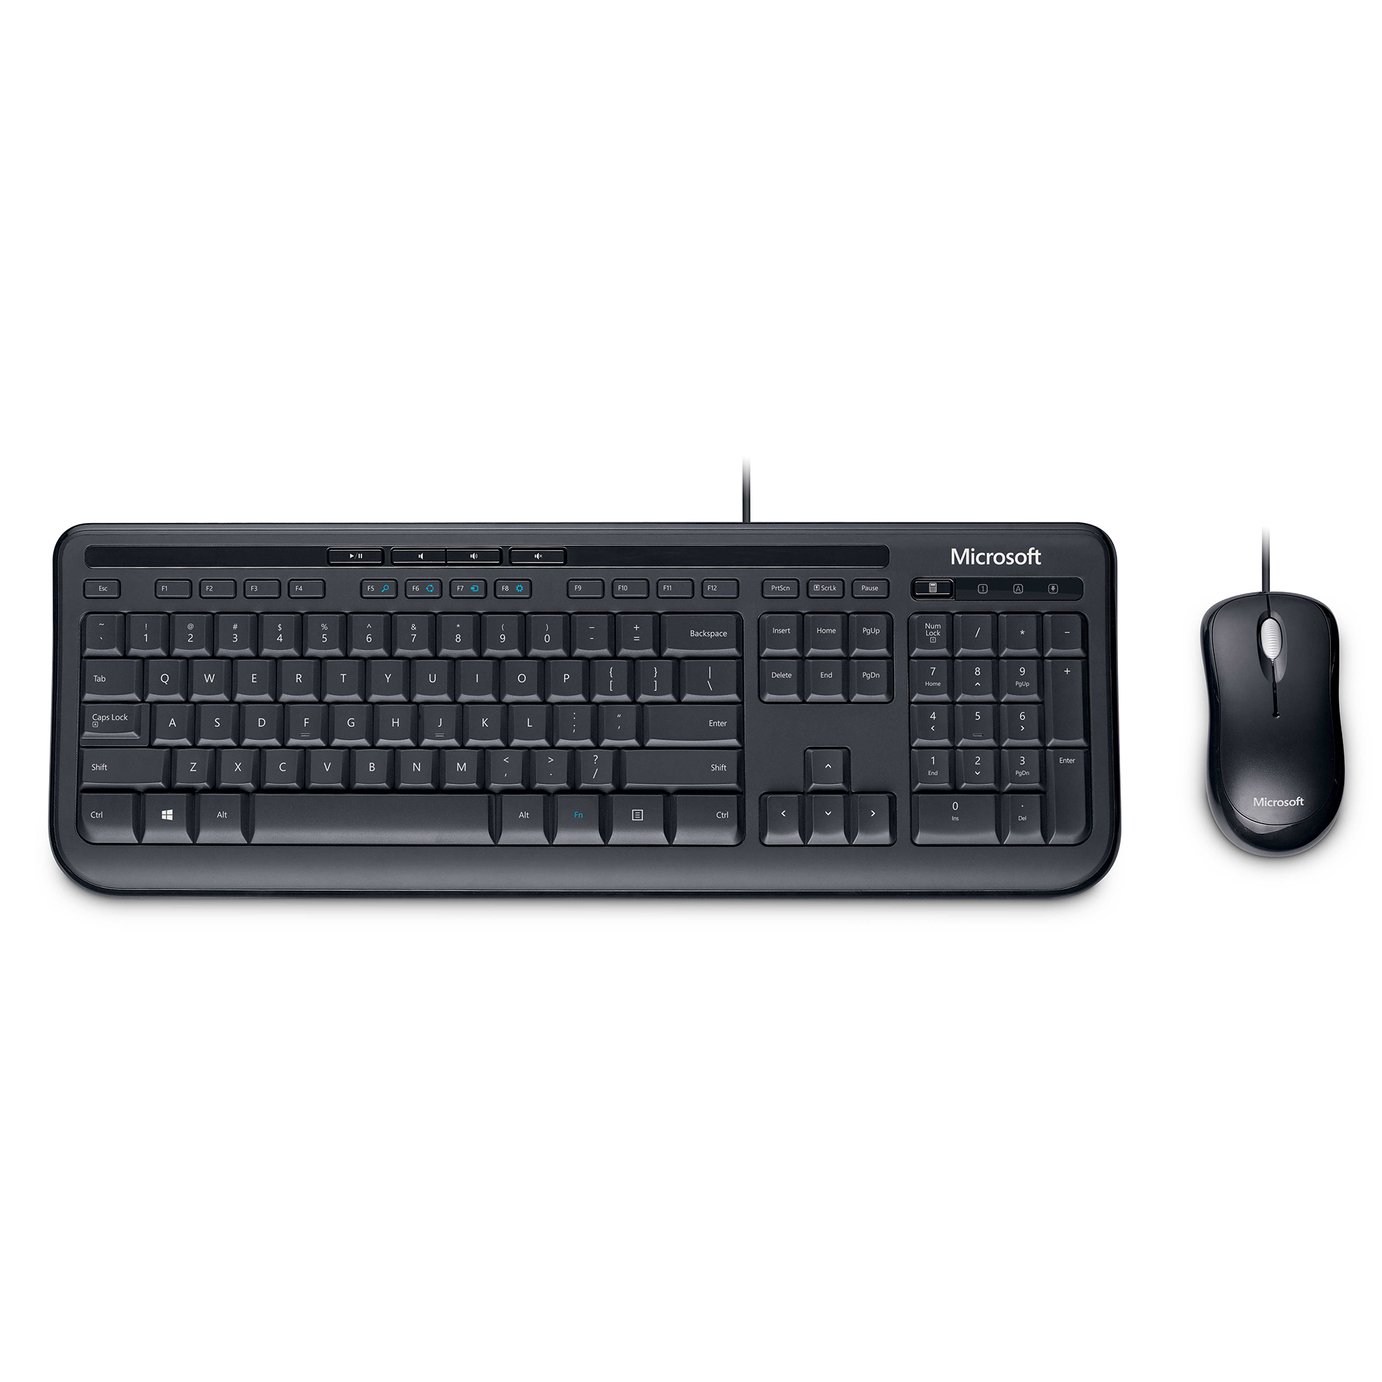 Microsoft APB-00006 Wired Mouse and Keyboard Review